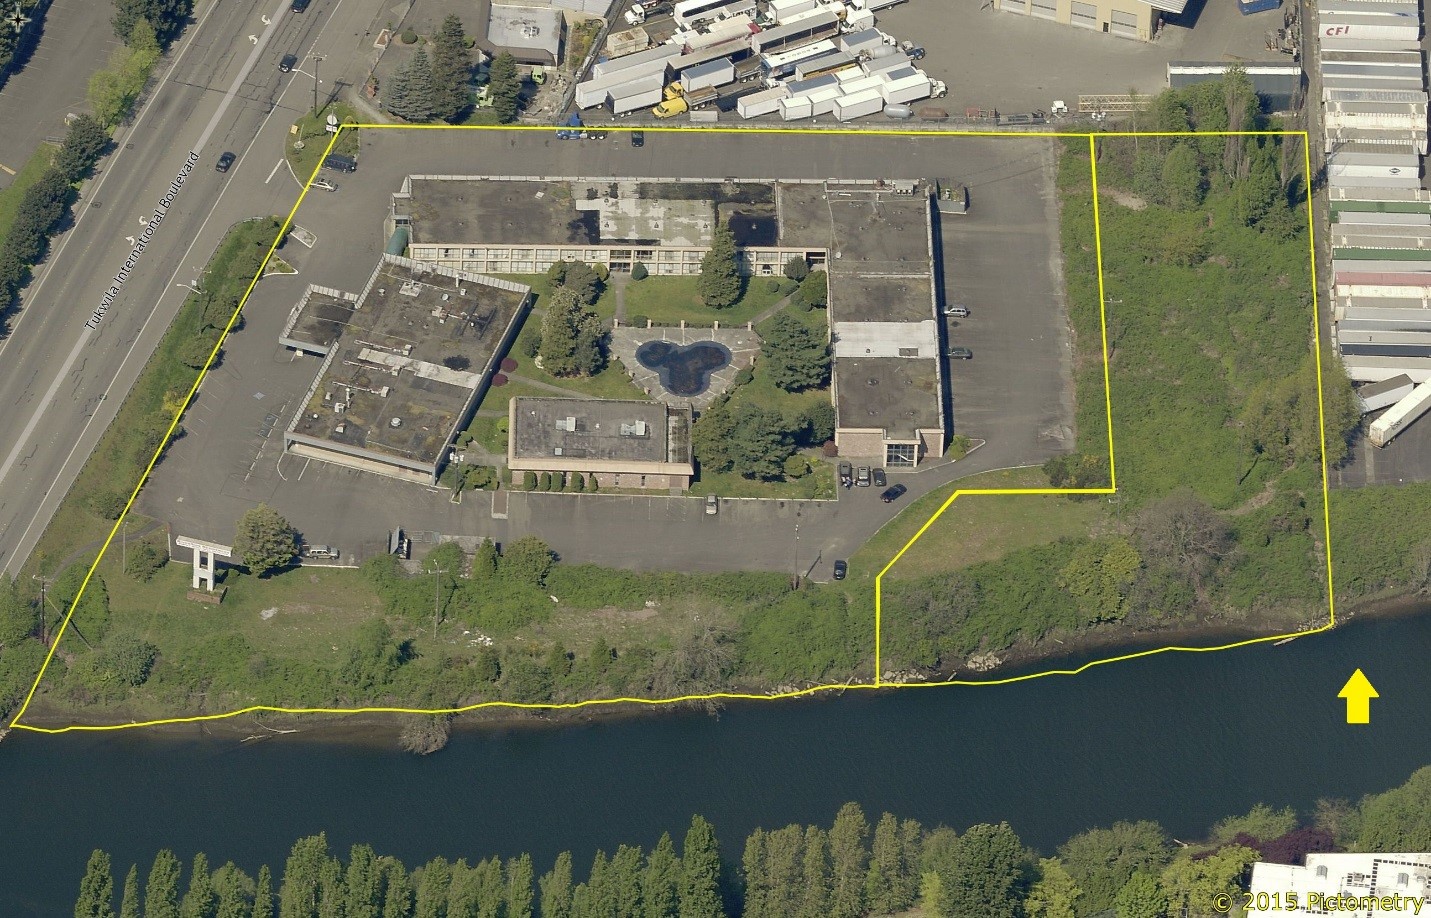 Chinook Wind Aerial Image of Site Pre-demolition